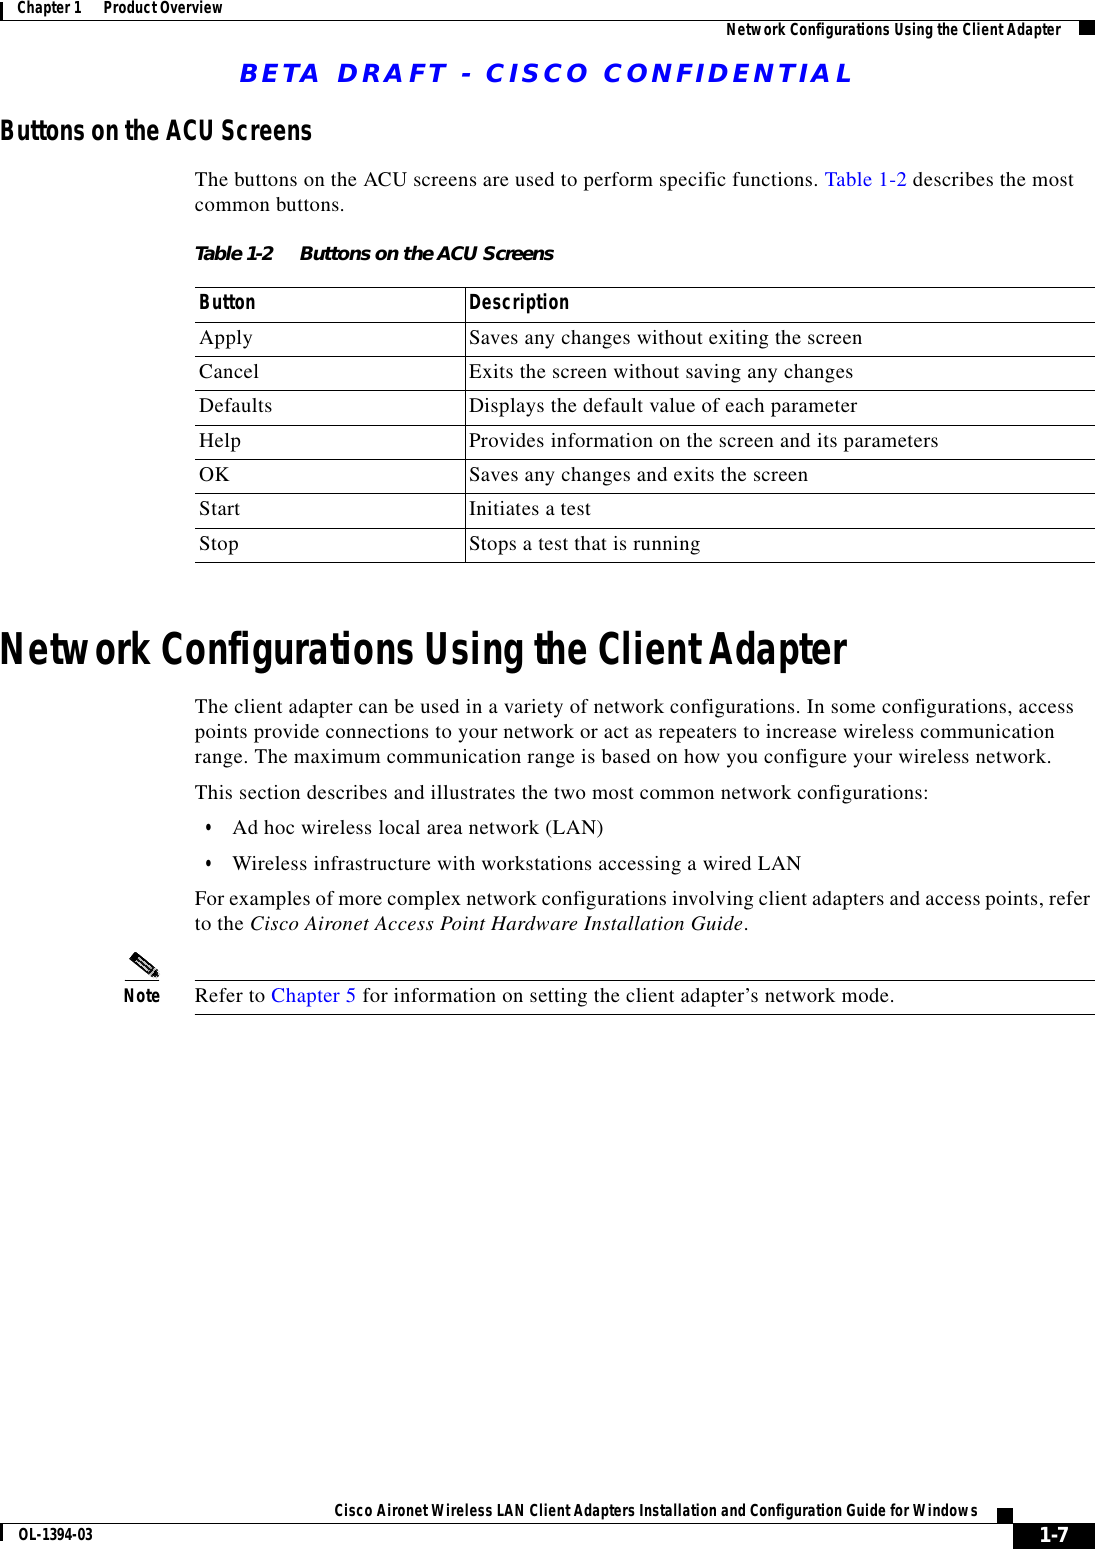 BETA DRAFT - CISCO CONFIDENTIAL1-7Cisco Aironet Wireless LAN Client Adapters Installation and Configuration Guide for WindowsOL-1394-03Chapter 1      Product Overview Network Configurations Using the Client AdapterButtons on the ACU ScreensThe buttons on the ACU screens are used to perform specific functions. Table 1-2 describes the most common buttons.Network Configurations Using the Client AdapterThe client adapter can be used in a variety of network configurations. In some configurations, access points provide connections to your network or act as repeaters to increase wireless communication range. The maximum communication range is based on how you configure your wireless network.This section describes and illustrates the two most common network configurations:•Ad hoc wireless local area network (LAN)•Wireless infrastructure with workstations accessing a wired LANFor examples of more complex network configurations involving client adapters and access points, refer to the Cisco Aironet Access Point Hardware Installation Guide.Note Refer to Chapter 5 for information on setting the client adapter’s network mode.Table 1-2 Buttons on the ACU ScreensButton DescriptionApply Saves any changes without exiting the screenCancel Exits the screen without saving any changesDefaults Displays the default value of each parameterHelp Provides information on the screen and its parametersOK Saves any changes and exits the screenStart Initiates a testStop Stops a test that is running